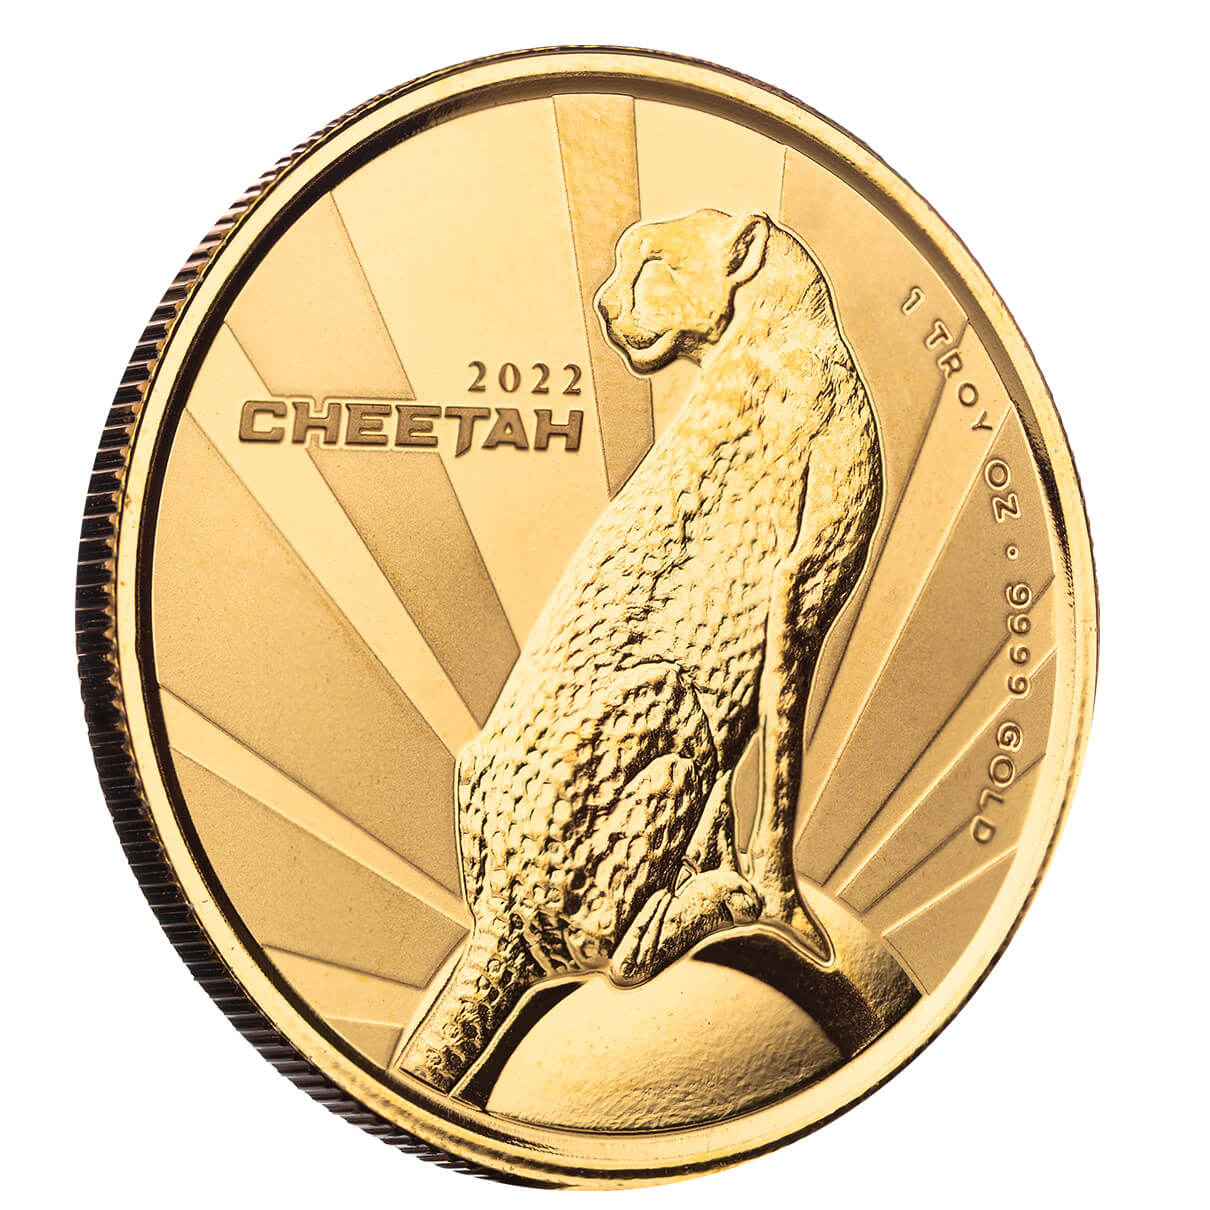 2022 Scottsdale Mint Cameroon Cheetah 1 Oz Gold Proof Coin 06